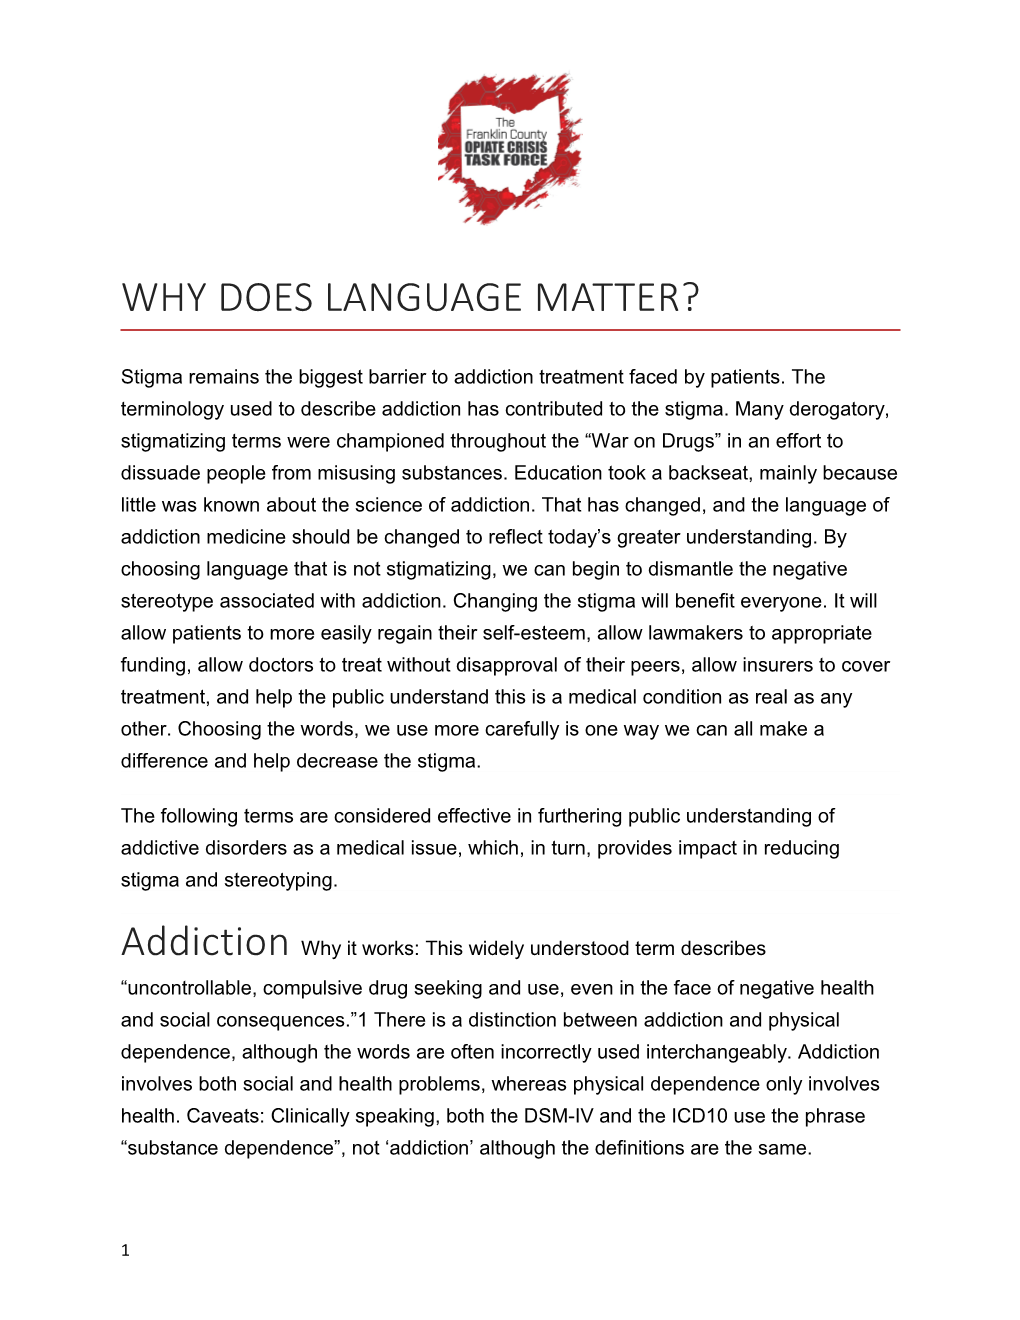 Why Does Language Matter?